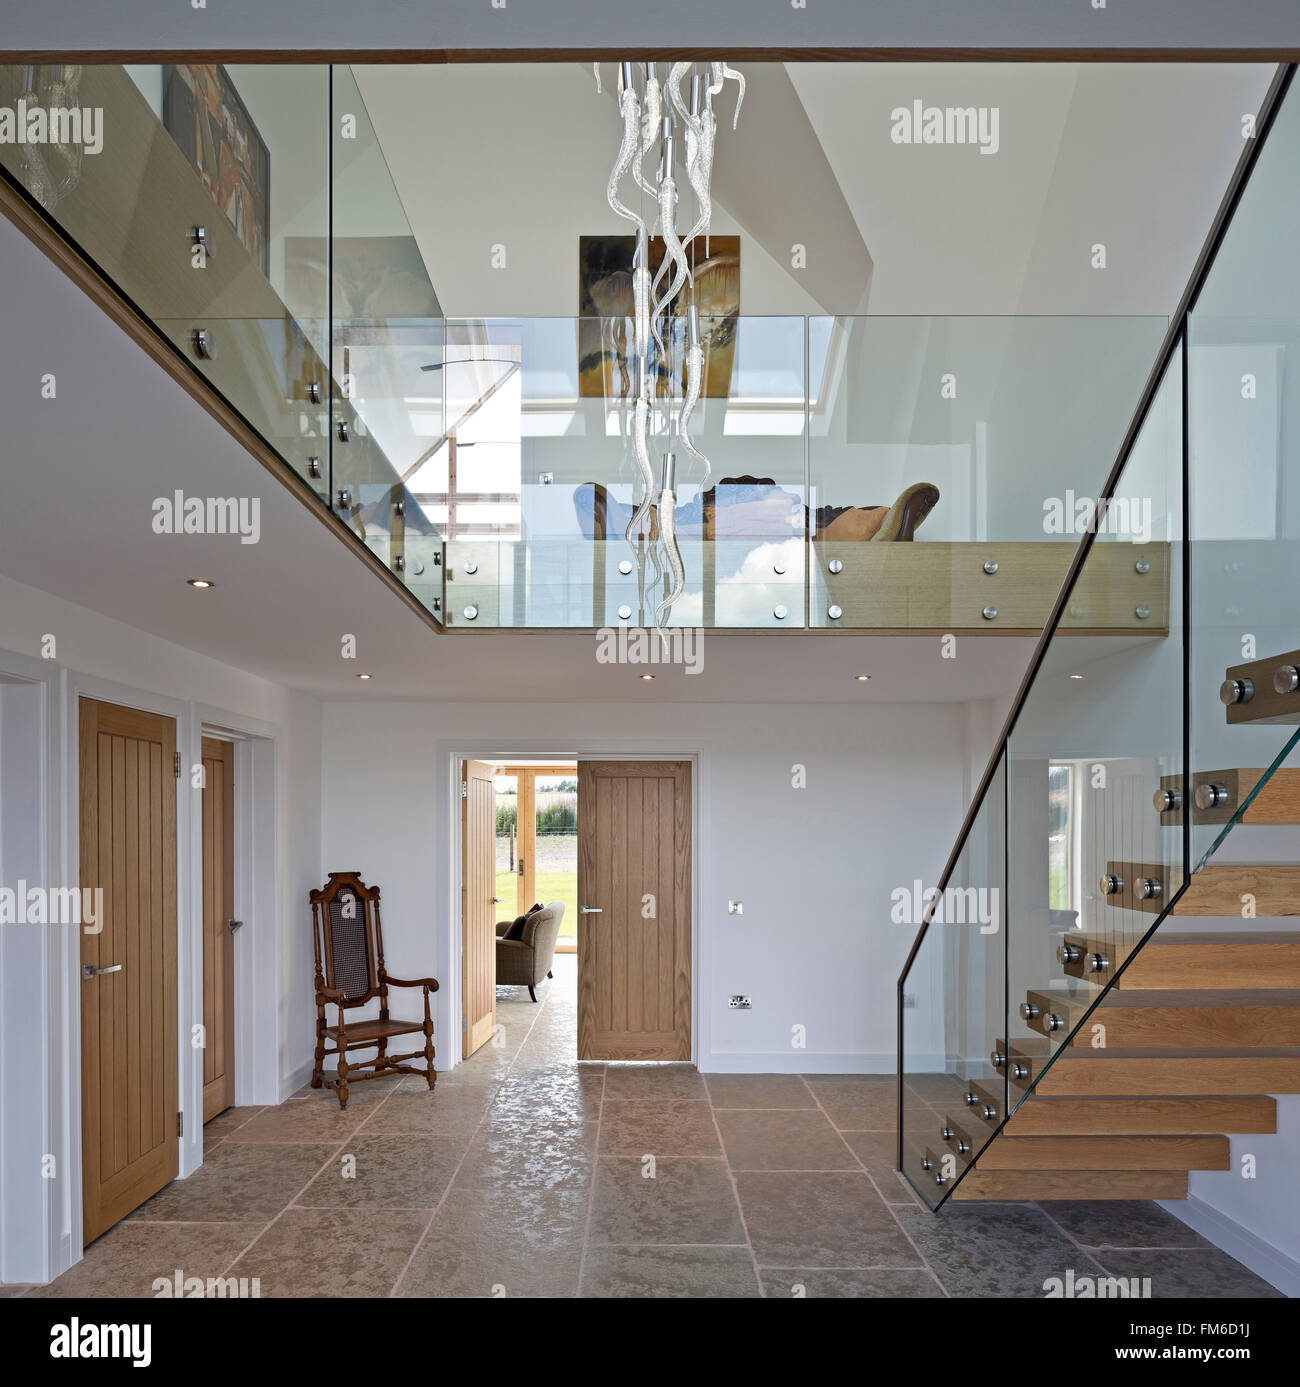 An interior view of a modern residential property called the Amor House, in Gleneagles, showing the entrance hall and staircase. Stock Photo